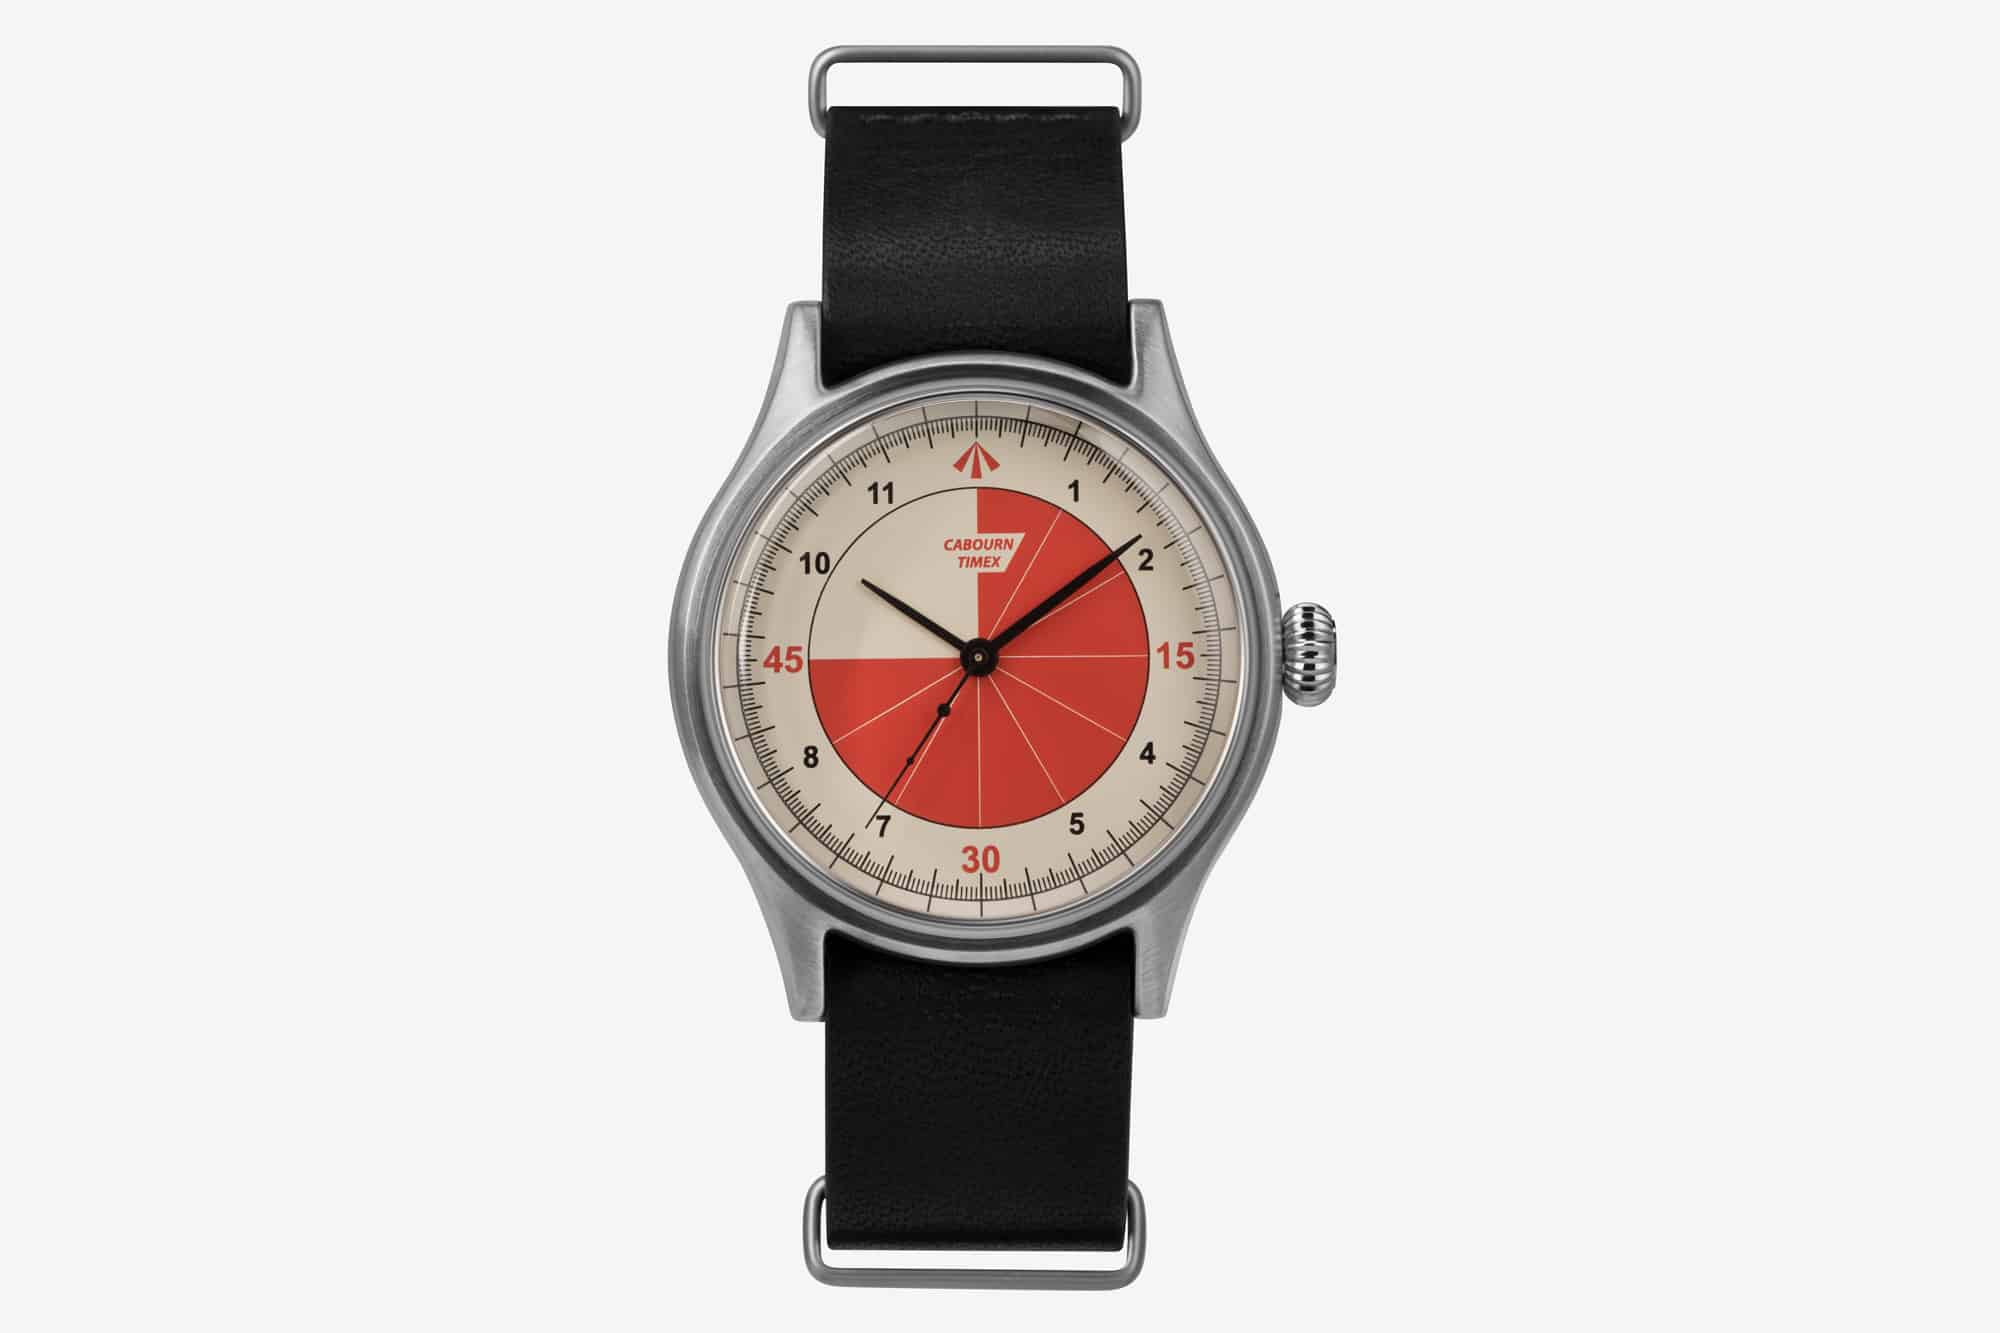 Introducing the Referee Watch from Timex and Nigel Cabourn